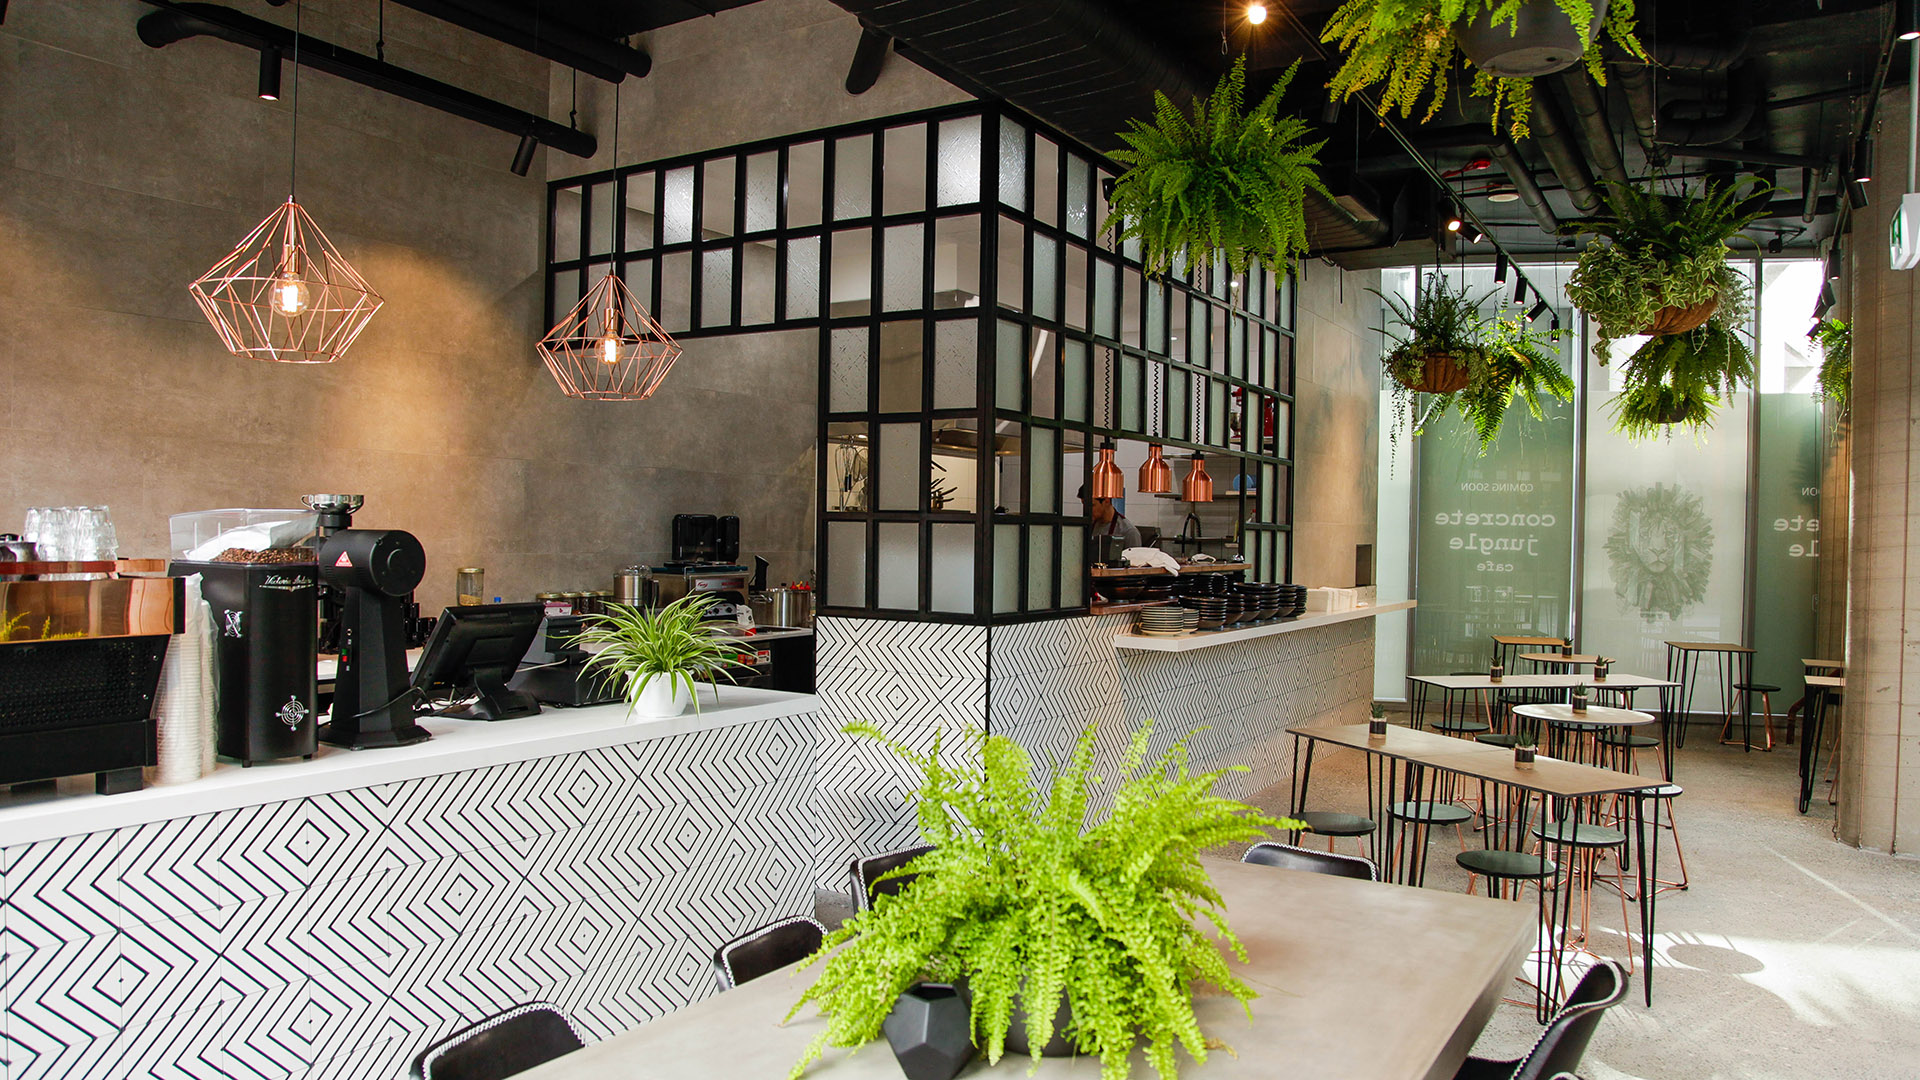 Eco-Conscious Cafe Concrete Jungle Brings a Touch of Greenery to